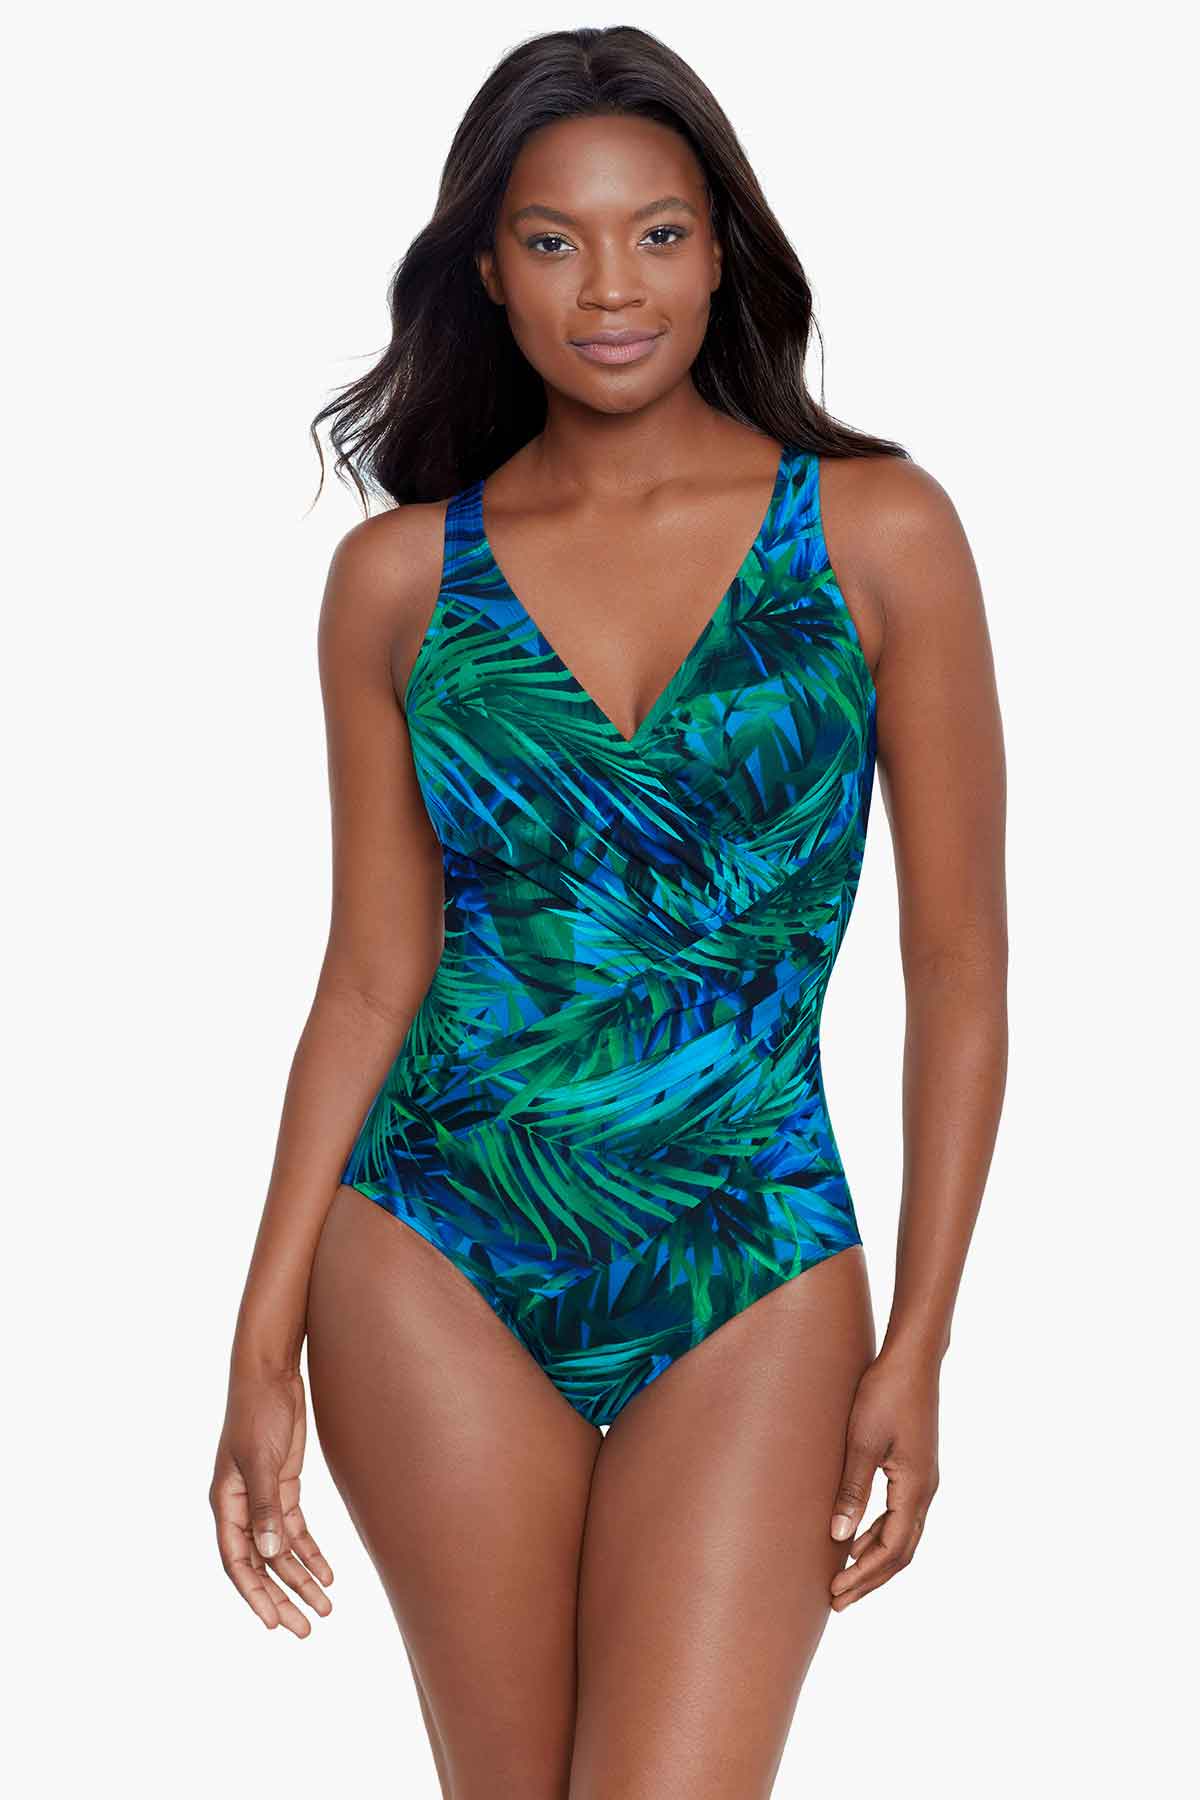 Miraclesuit Women's One Piece Swimsuits